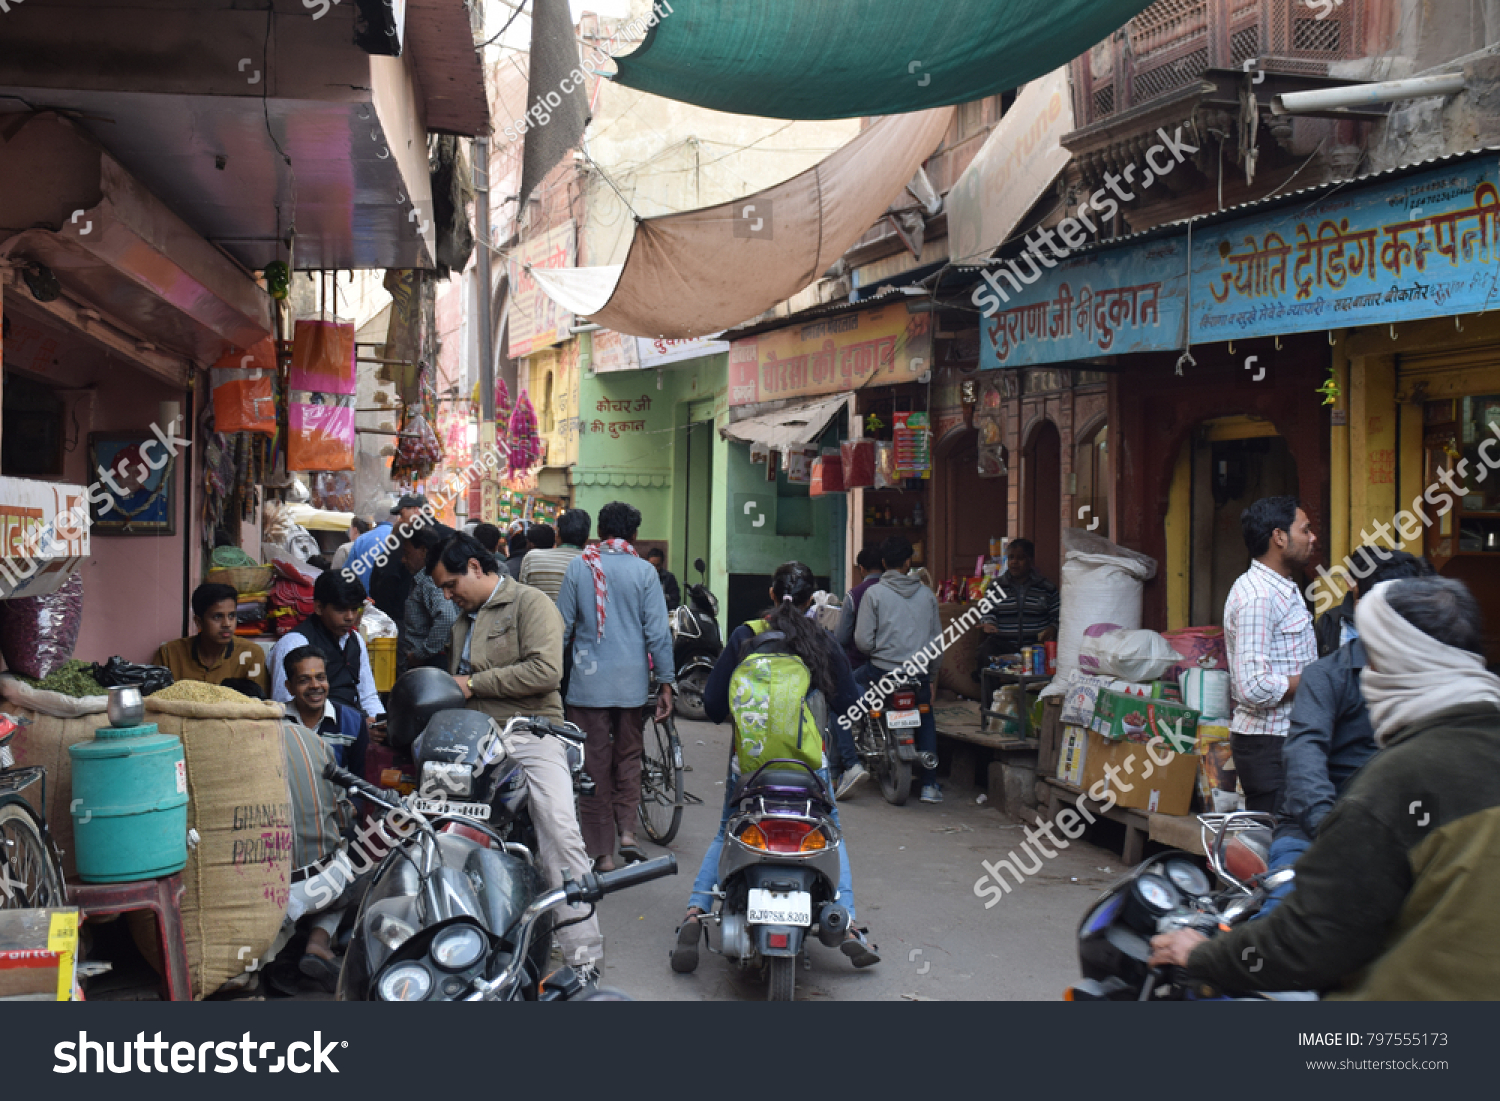 BIKANER, RAJASTHAN, INDIA - FEBRUARY 13 - View of a busy street with people and shops on february 13, 2016 in Bikaner #797555173